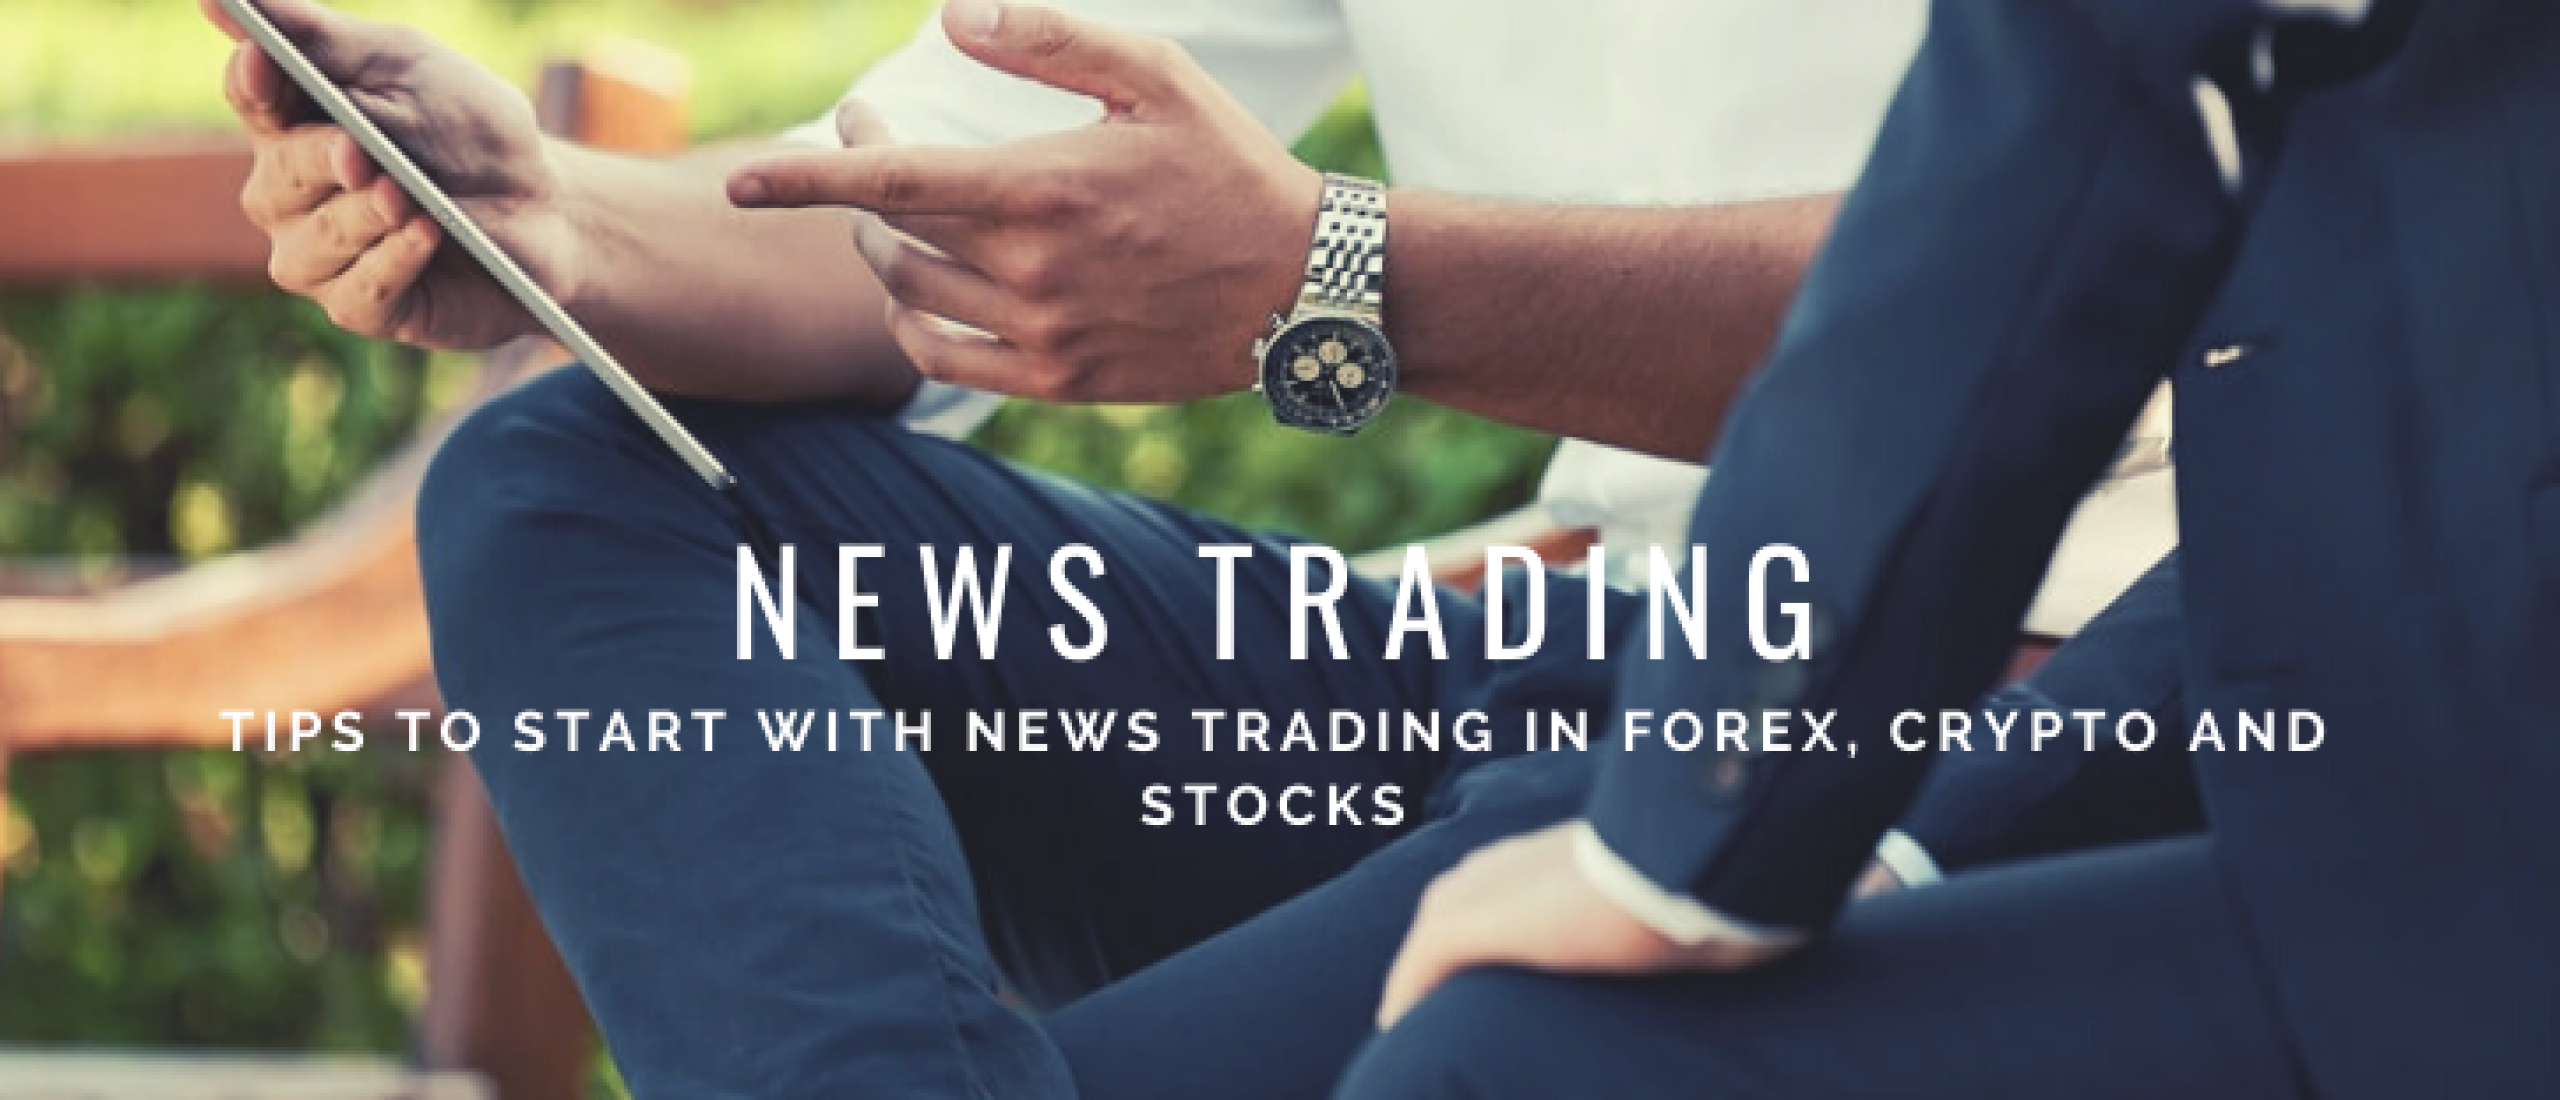 Trading the News: 3x News Trading Strategies + 7 Tips